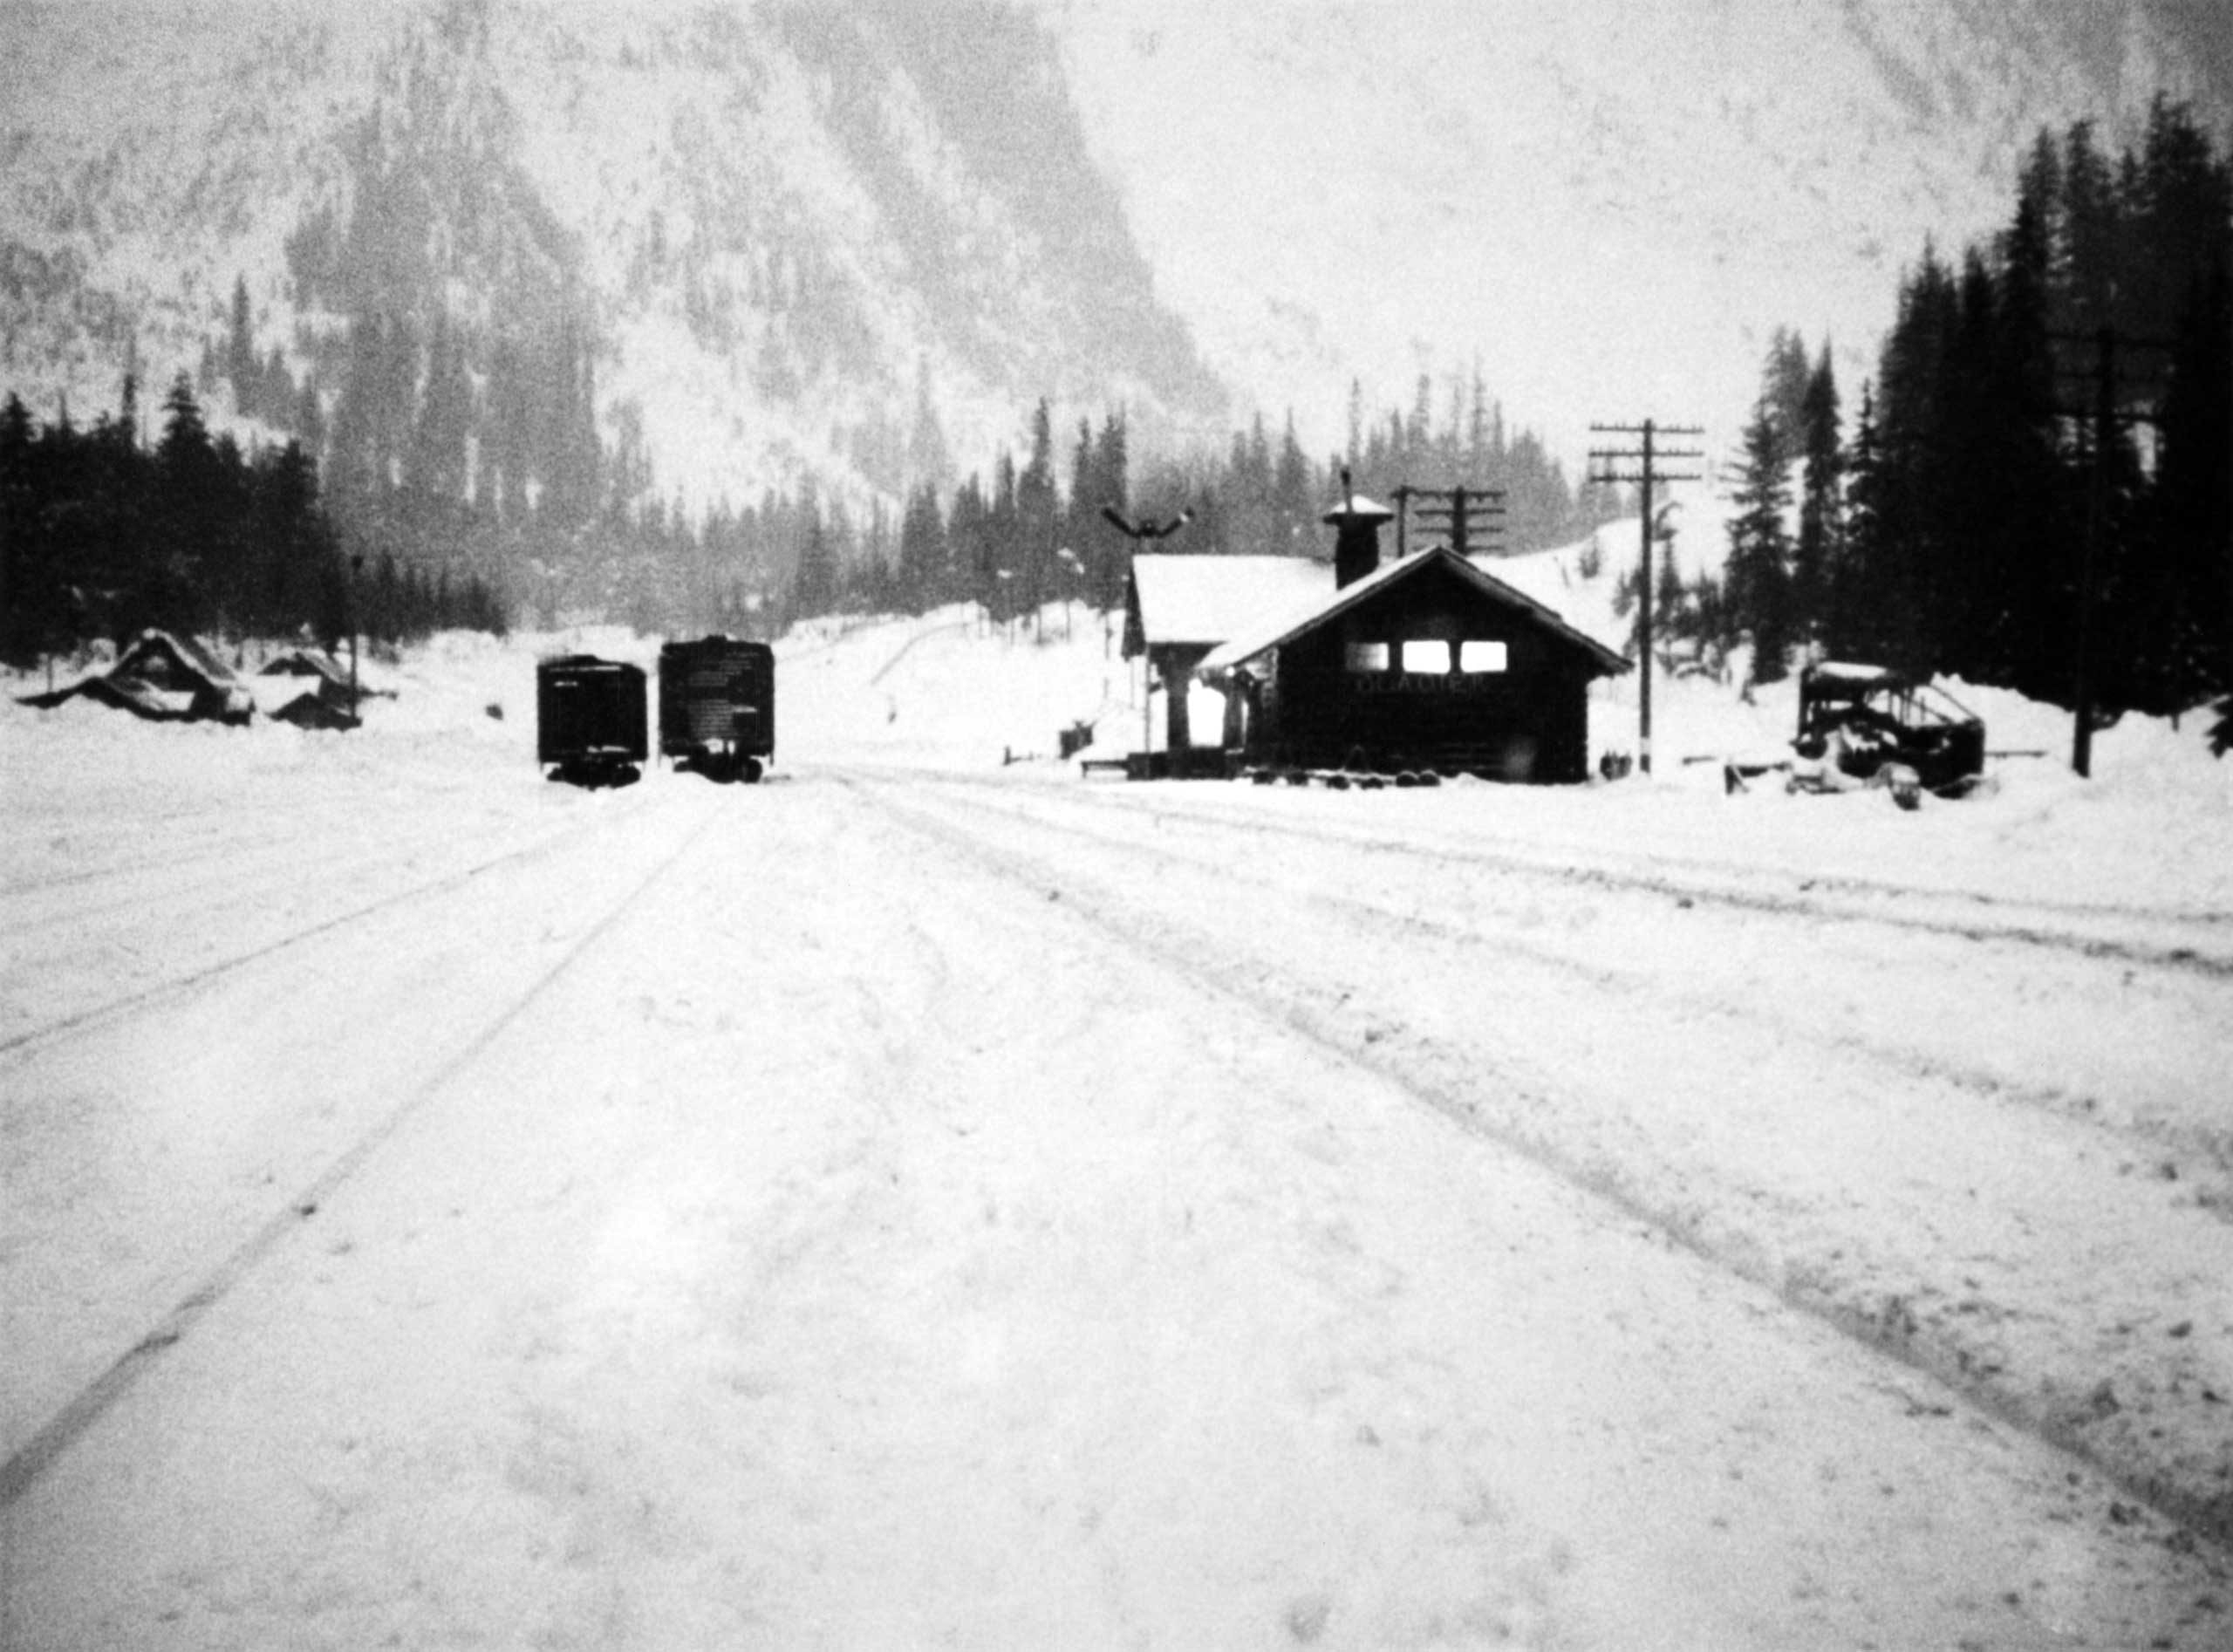 Canadian Pacific Railway station at Glacier, a railway whistlestop and locality near the summit of the Rogers Pass in Glacier National Park, British Columbia, Canada, 1958.